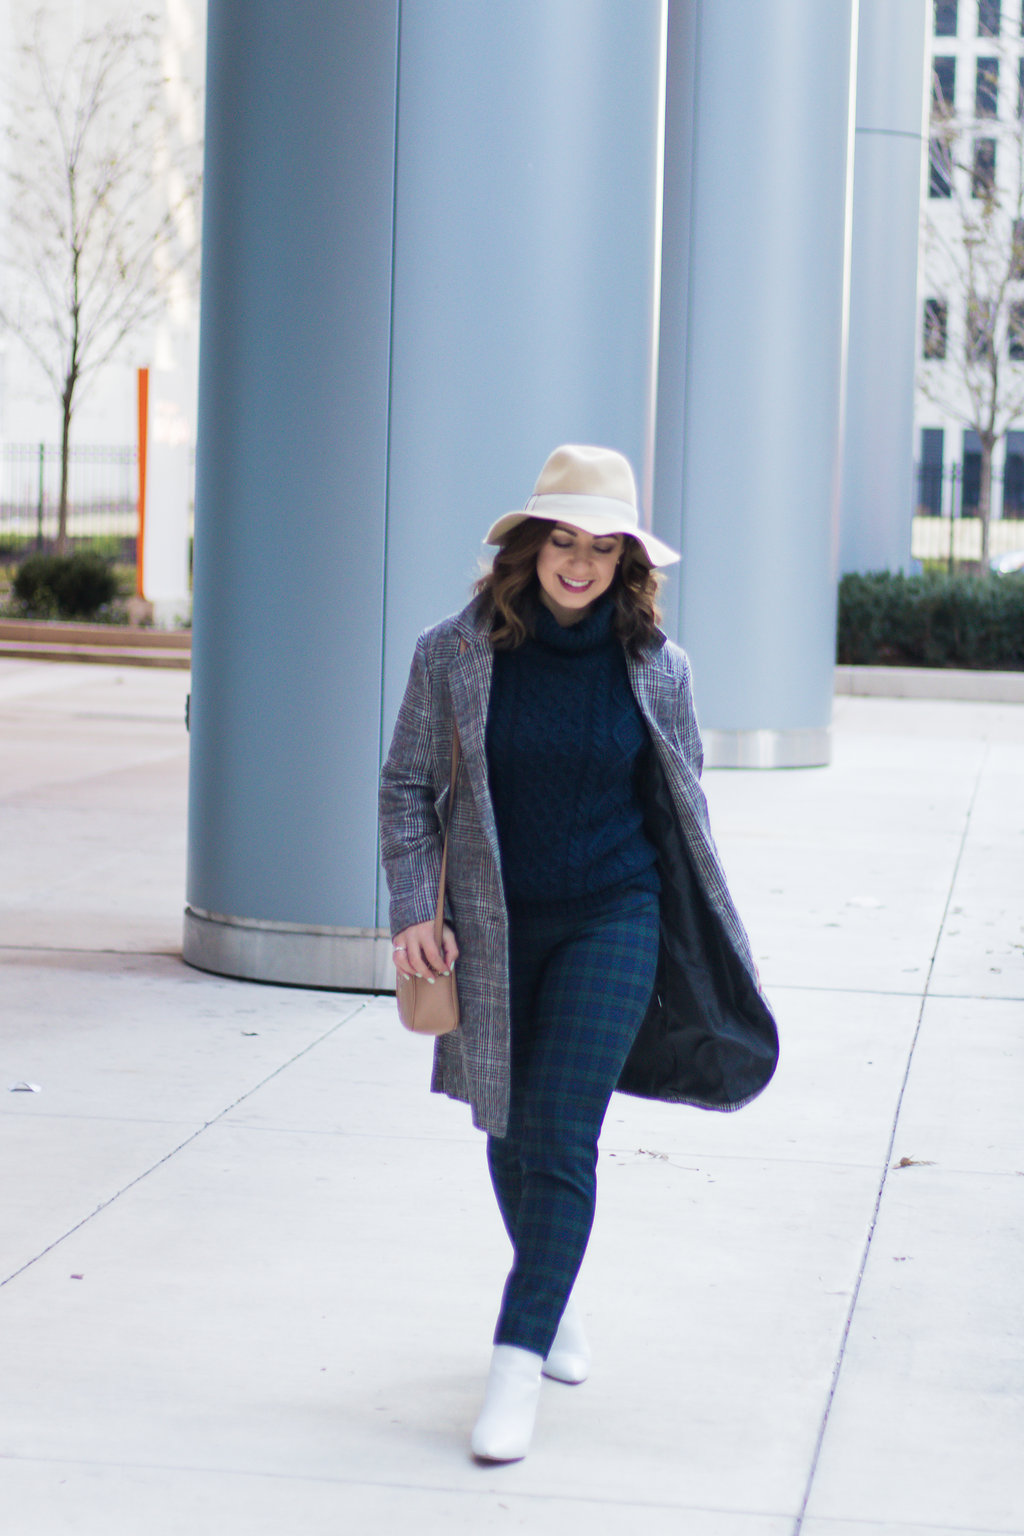 Lifestyle blogger Roxanne of Glass of Glam wearing plaid pants, a plaid coat, felt fedora, white booties, and a cable knit sweater